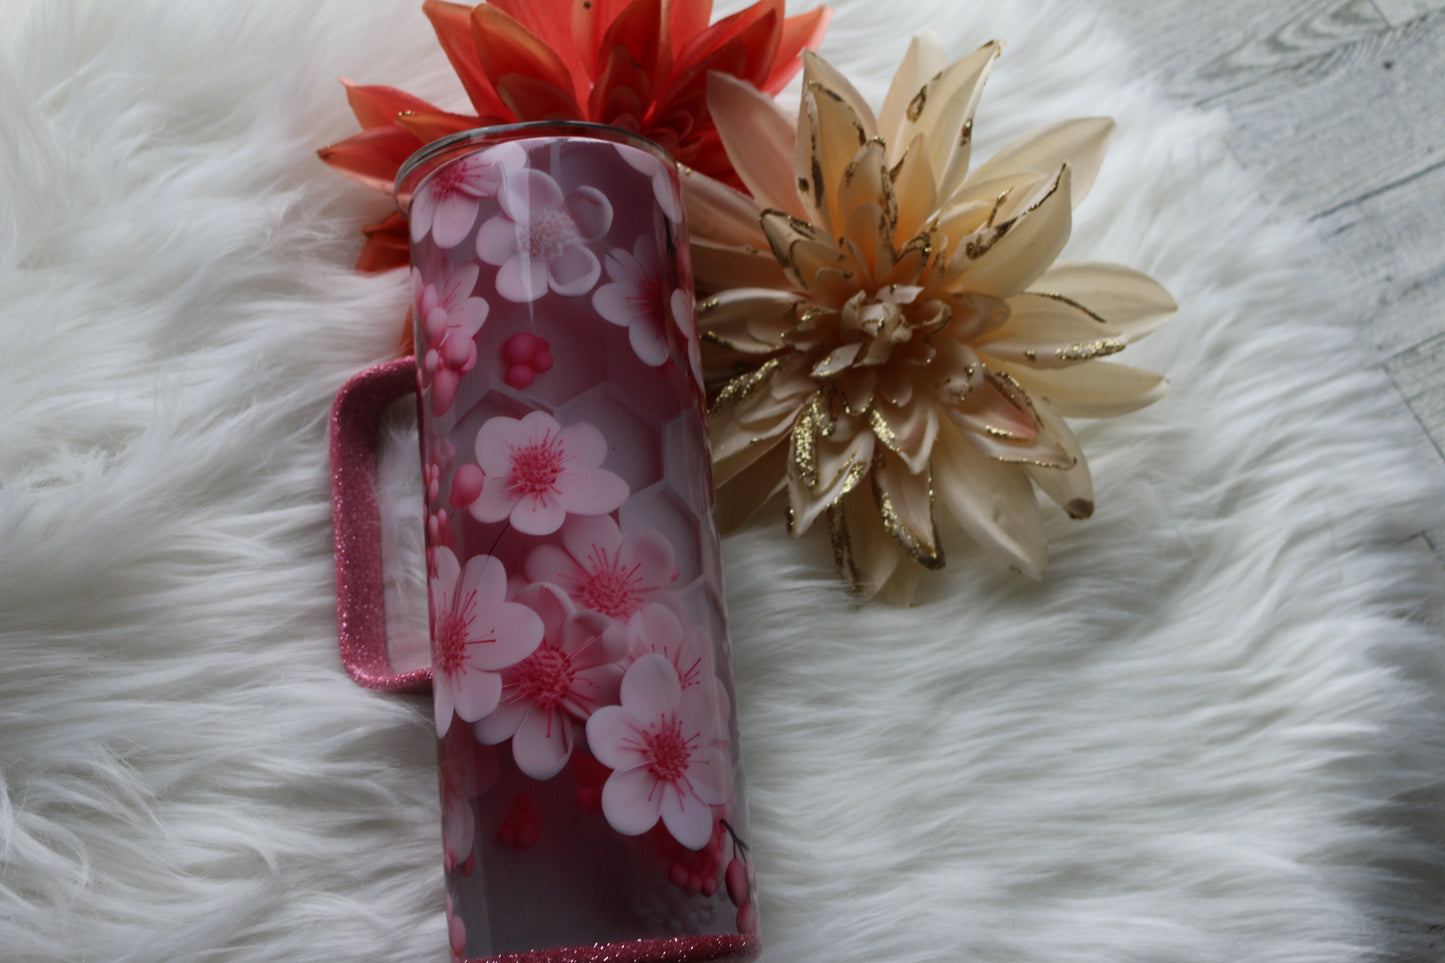 20 oz "honeycomb floral" Stainless Steal Tumbler with a handle